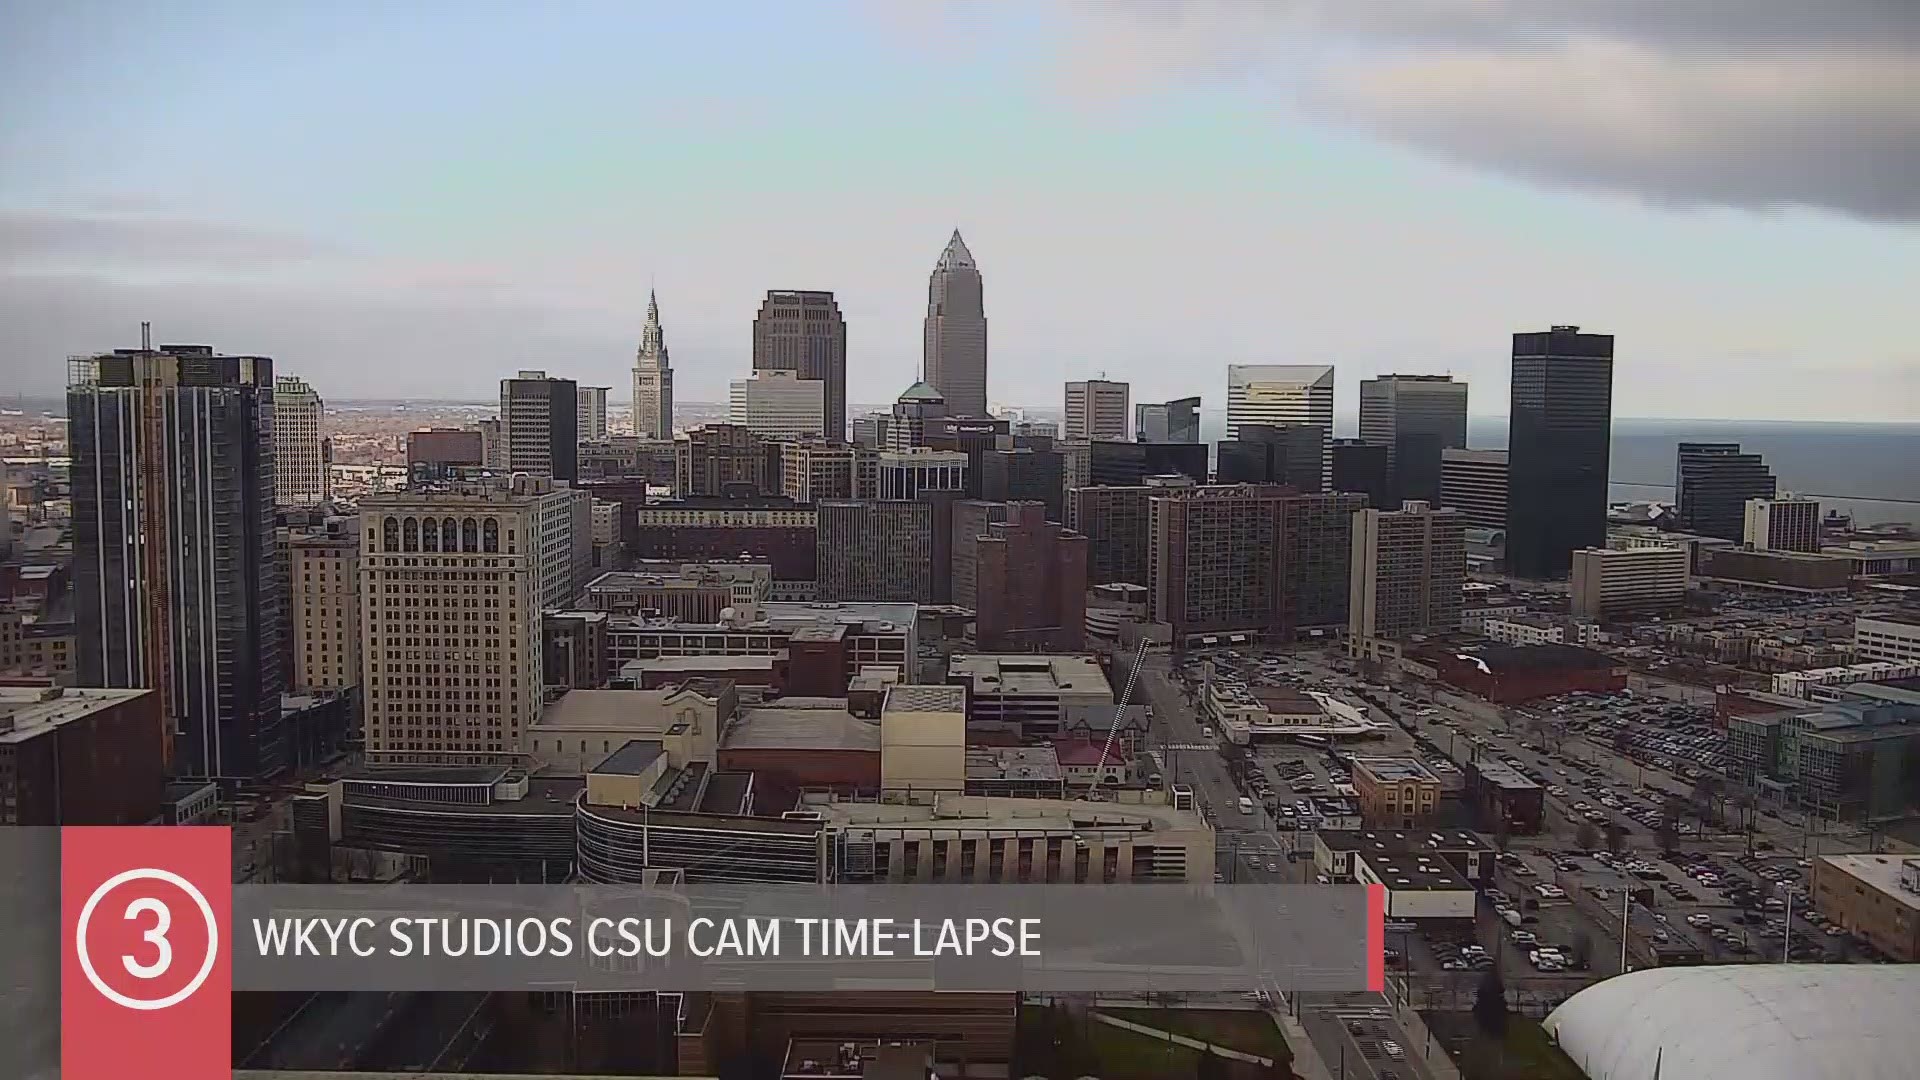 WATCH | Our Wednesday weather time-lapse from the WKYC Studios CSU Cam shows plenty of sunshine! #3weather